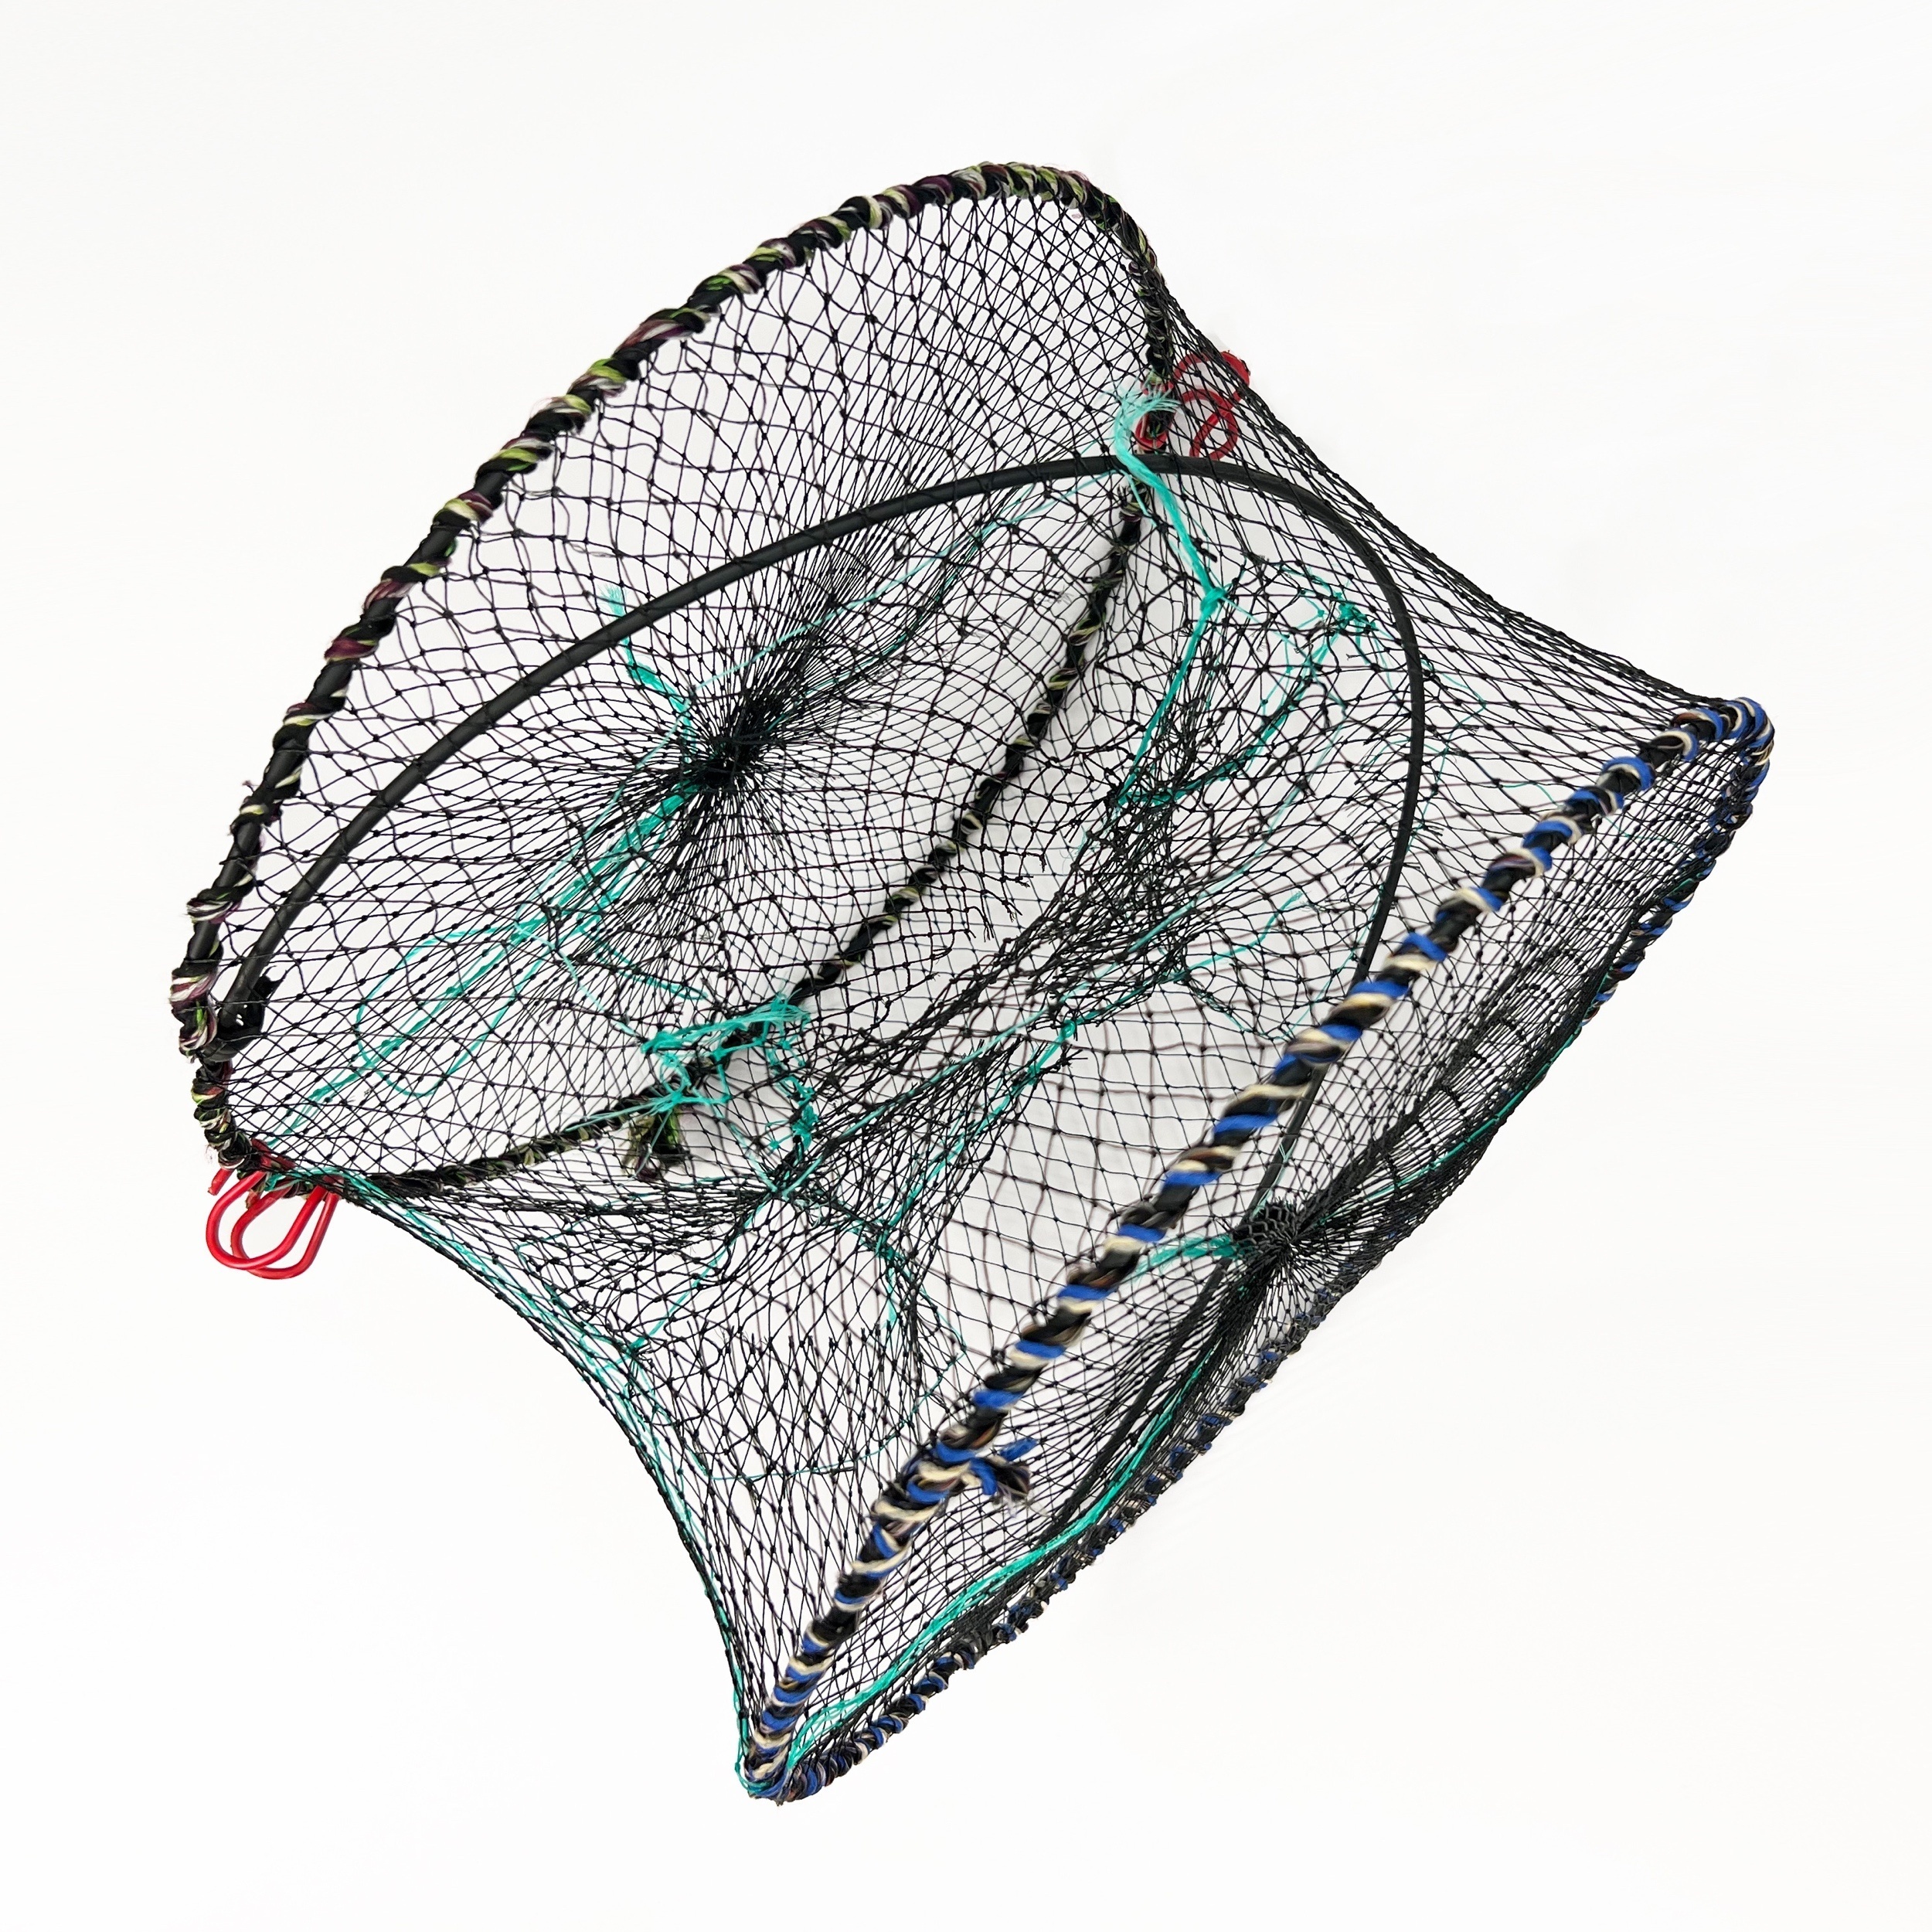  MERRYHAPY 1 Set EEL Cage Fishing Cage Portable Fishing Traps  Reusable Crab Traps Netting Fishing Trout Fishing Net Fishing Baits  Accessories Portable Crab Traps Fold Puller Plastic : Sports & Outdoors